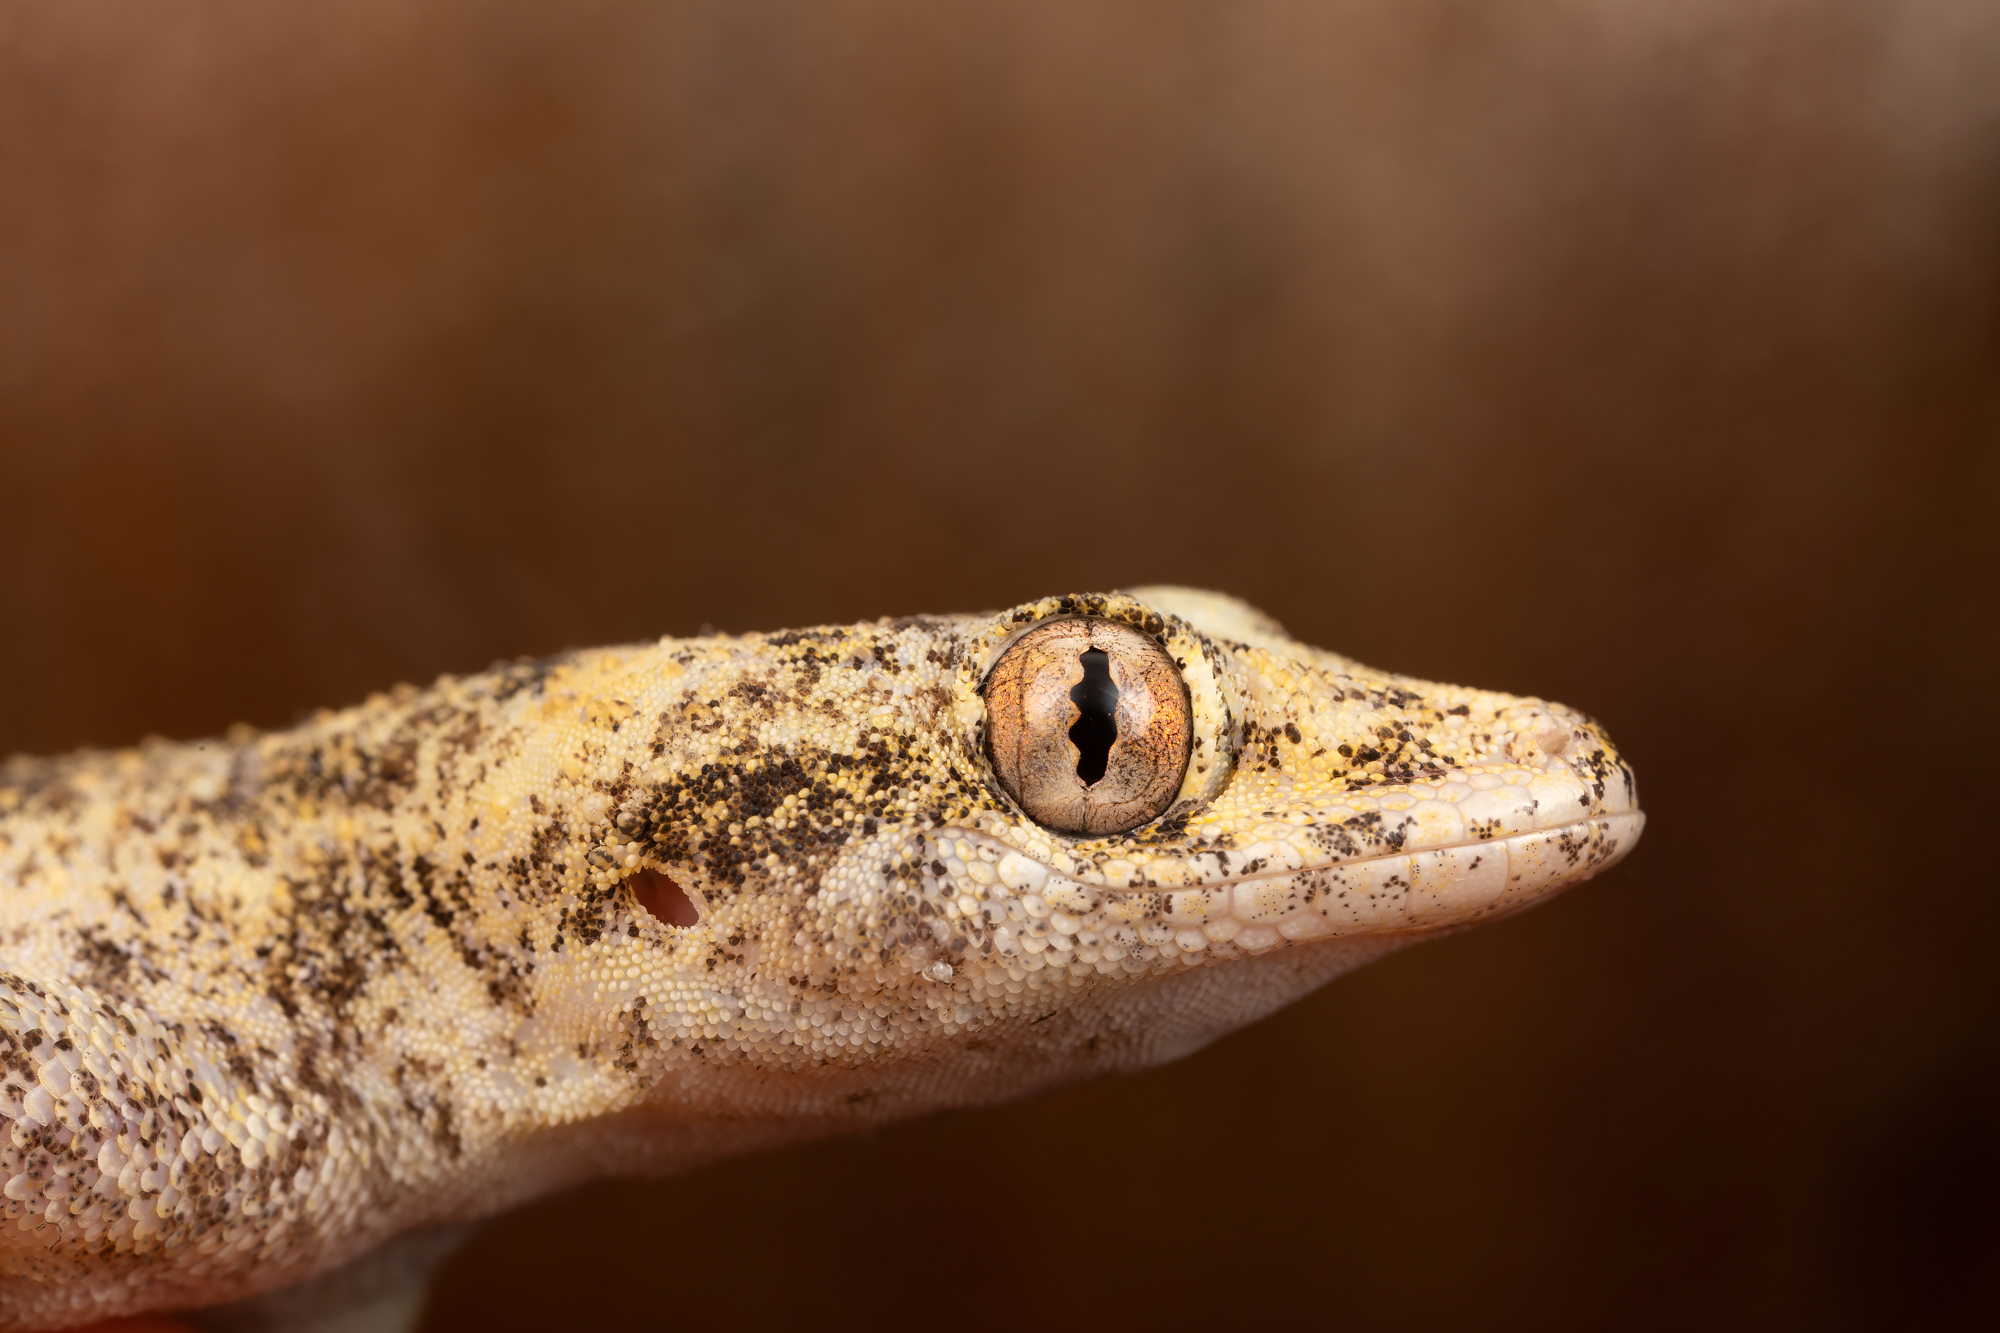 Southern Turniptail Gecko